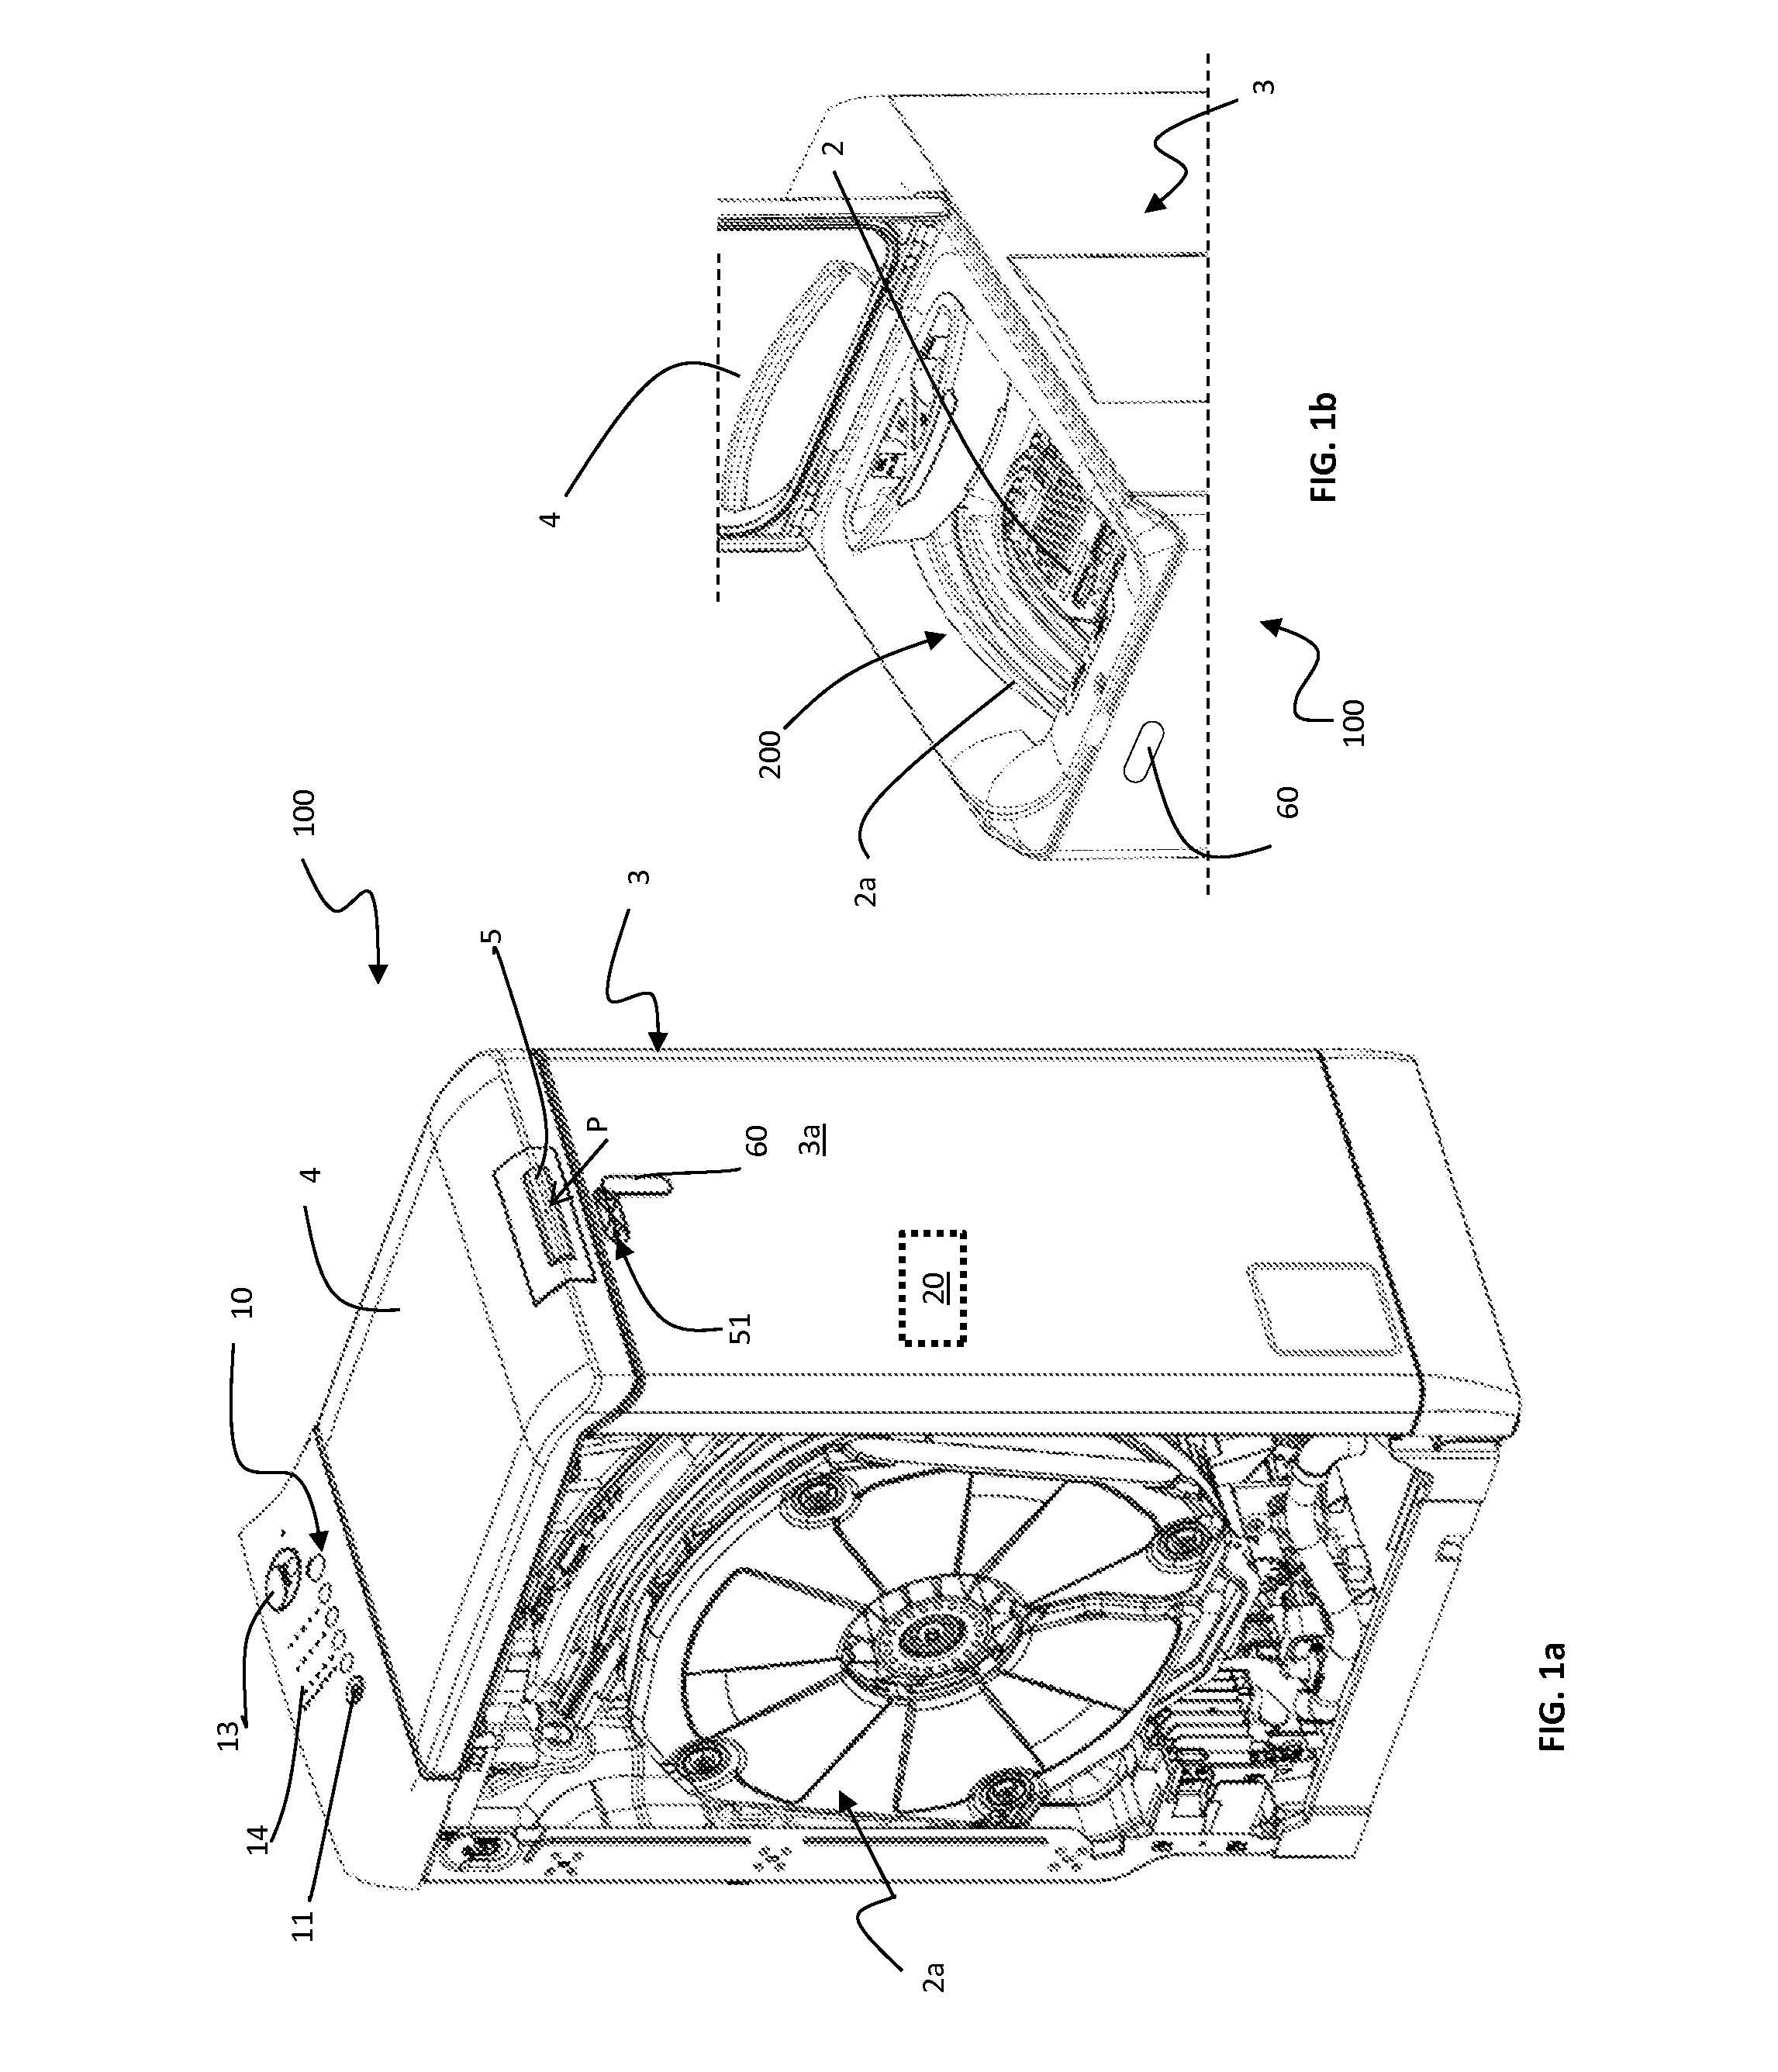 Emergency openable laundry washing and/or drying appliance